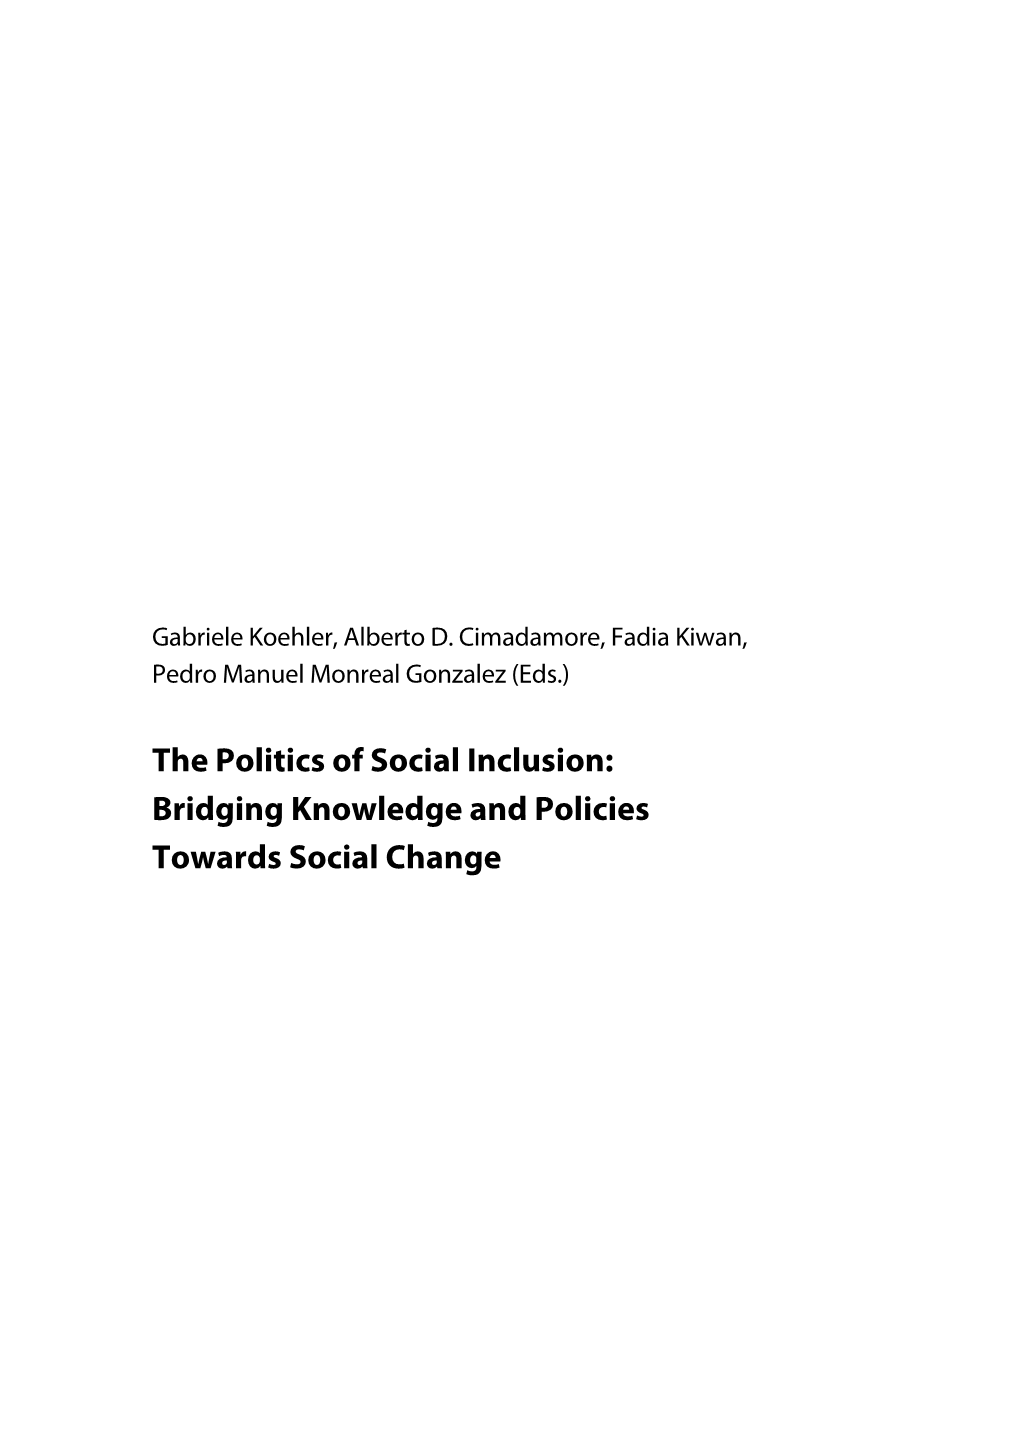 The Politics of Social Inclusion: Bridging Knowledge and Policies Towards Social Change About CROP